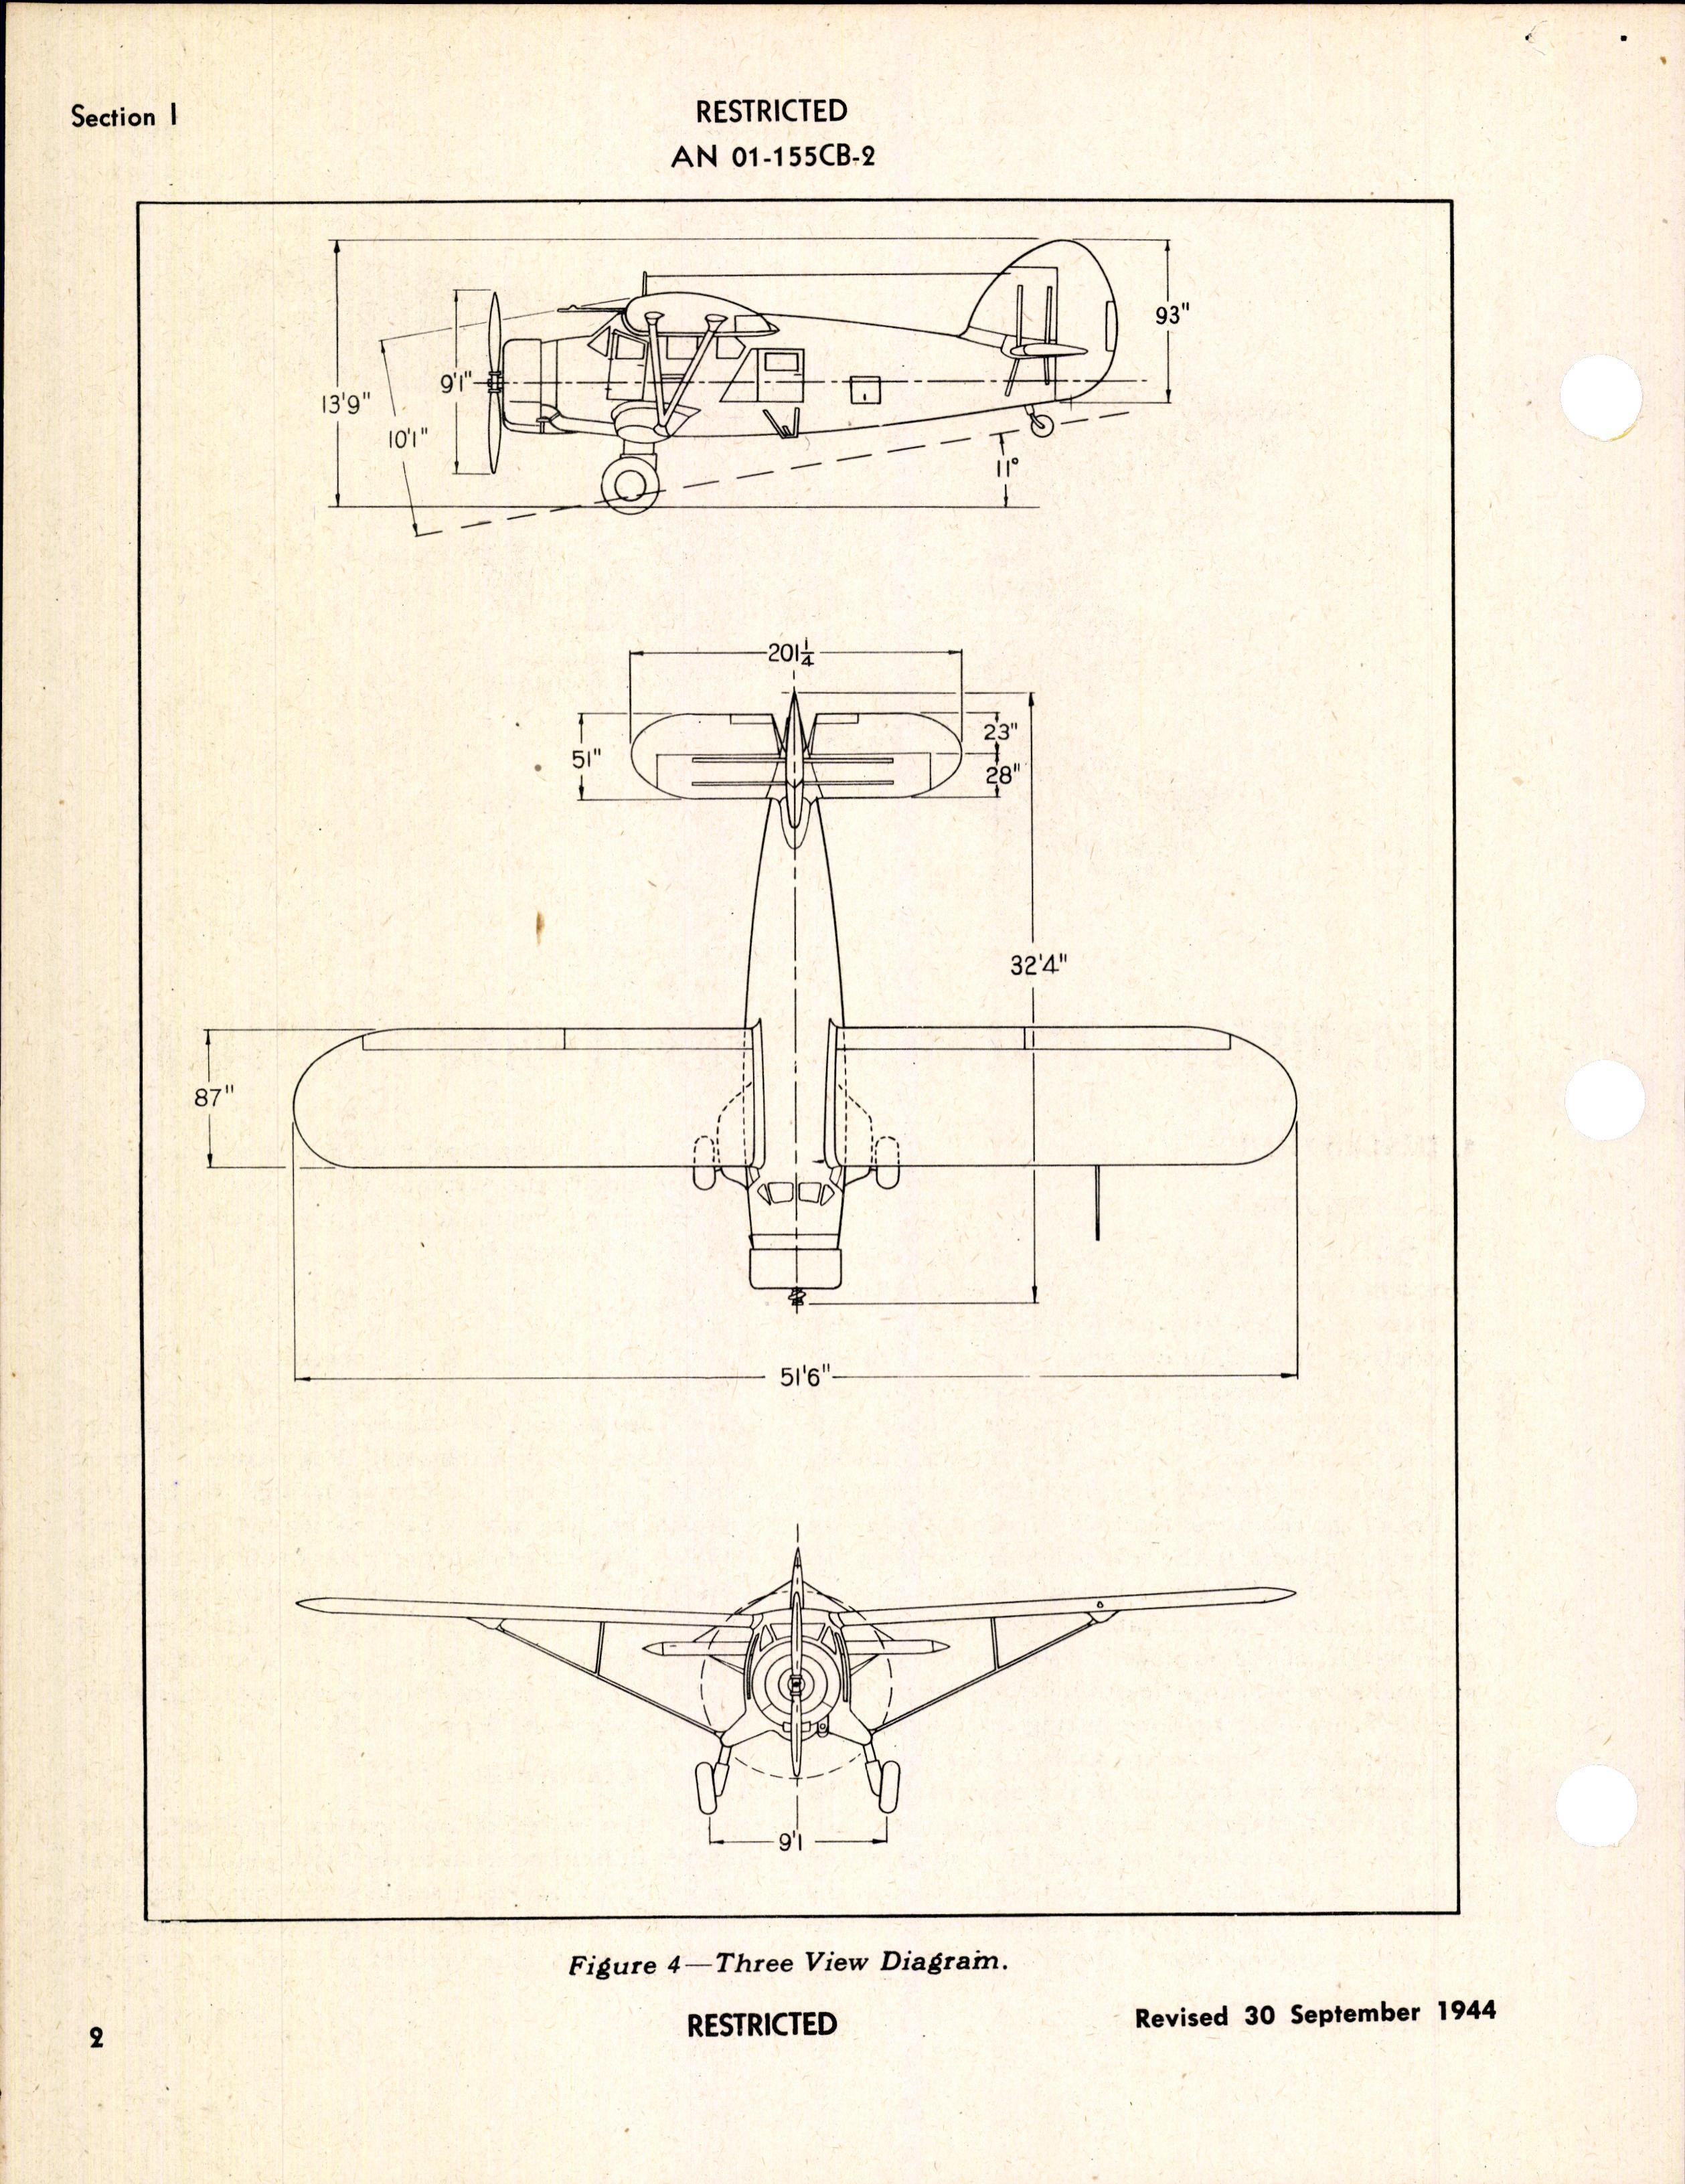 Sample page 6 from AirCorps Library document: Erection and Maintenance Instructions for C-64A